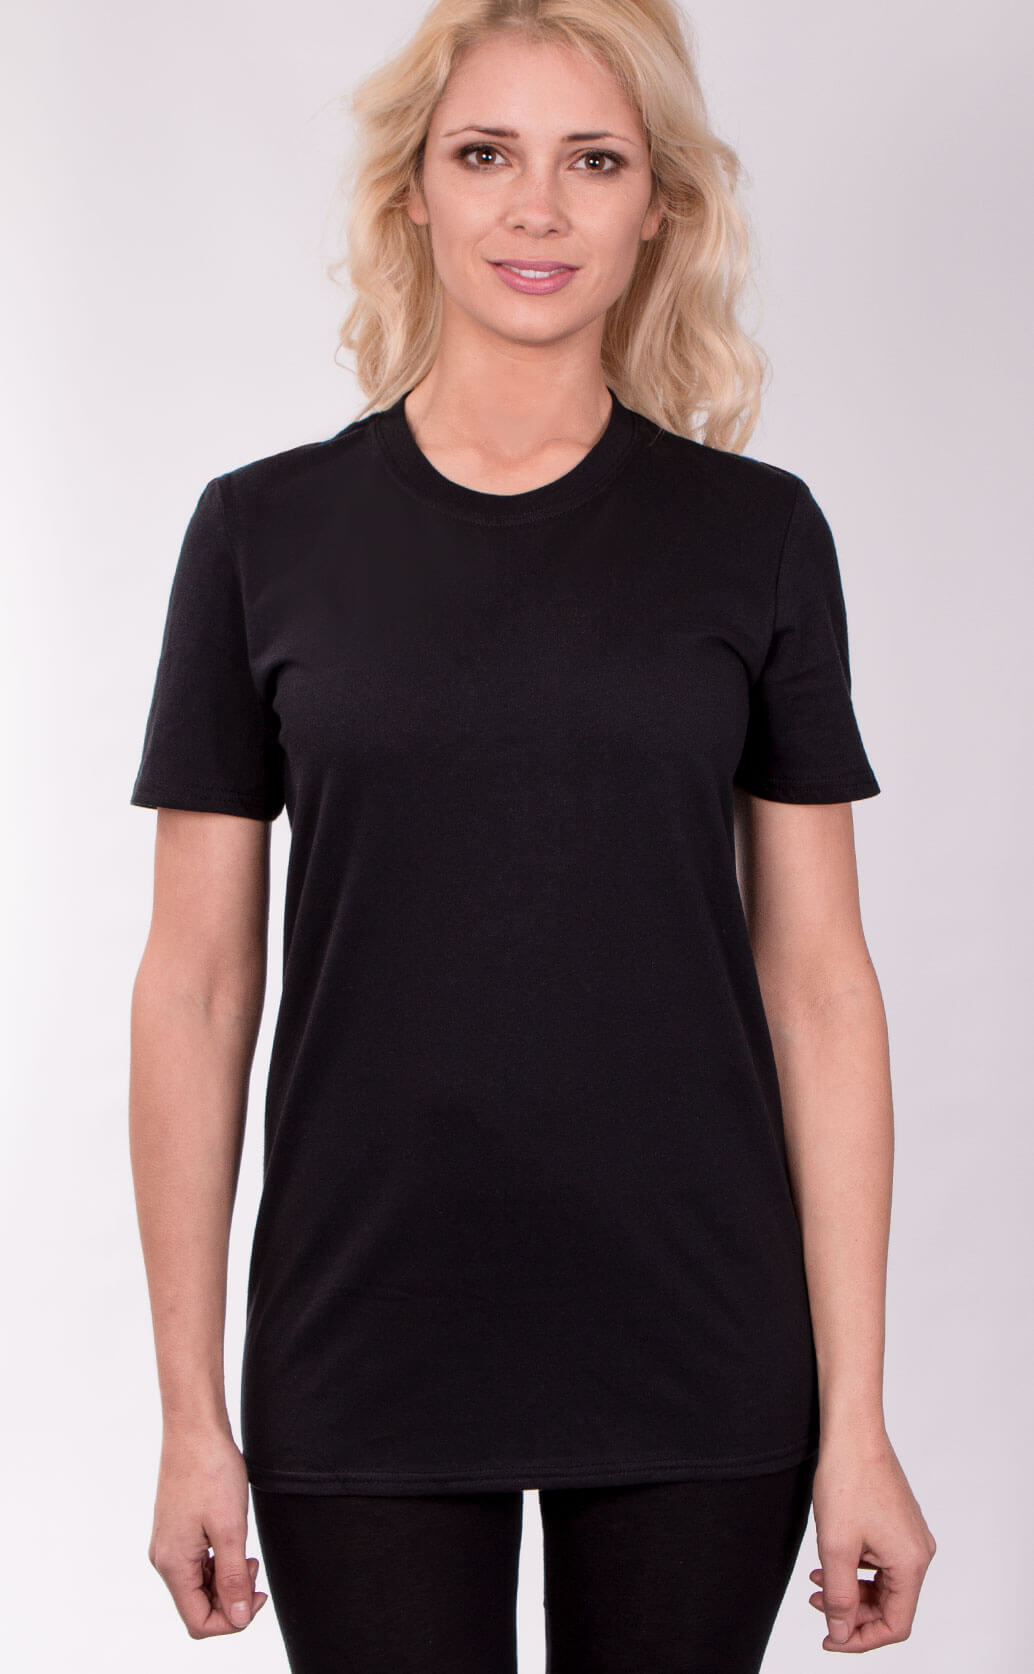 Size guide image for Unisex T Shirt shirt type. Shot from the front. Model is dressed in black